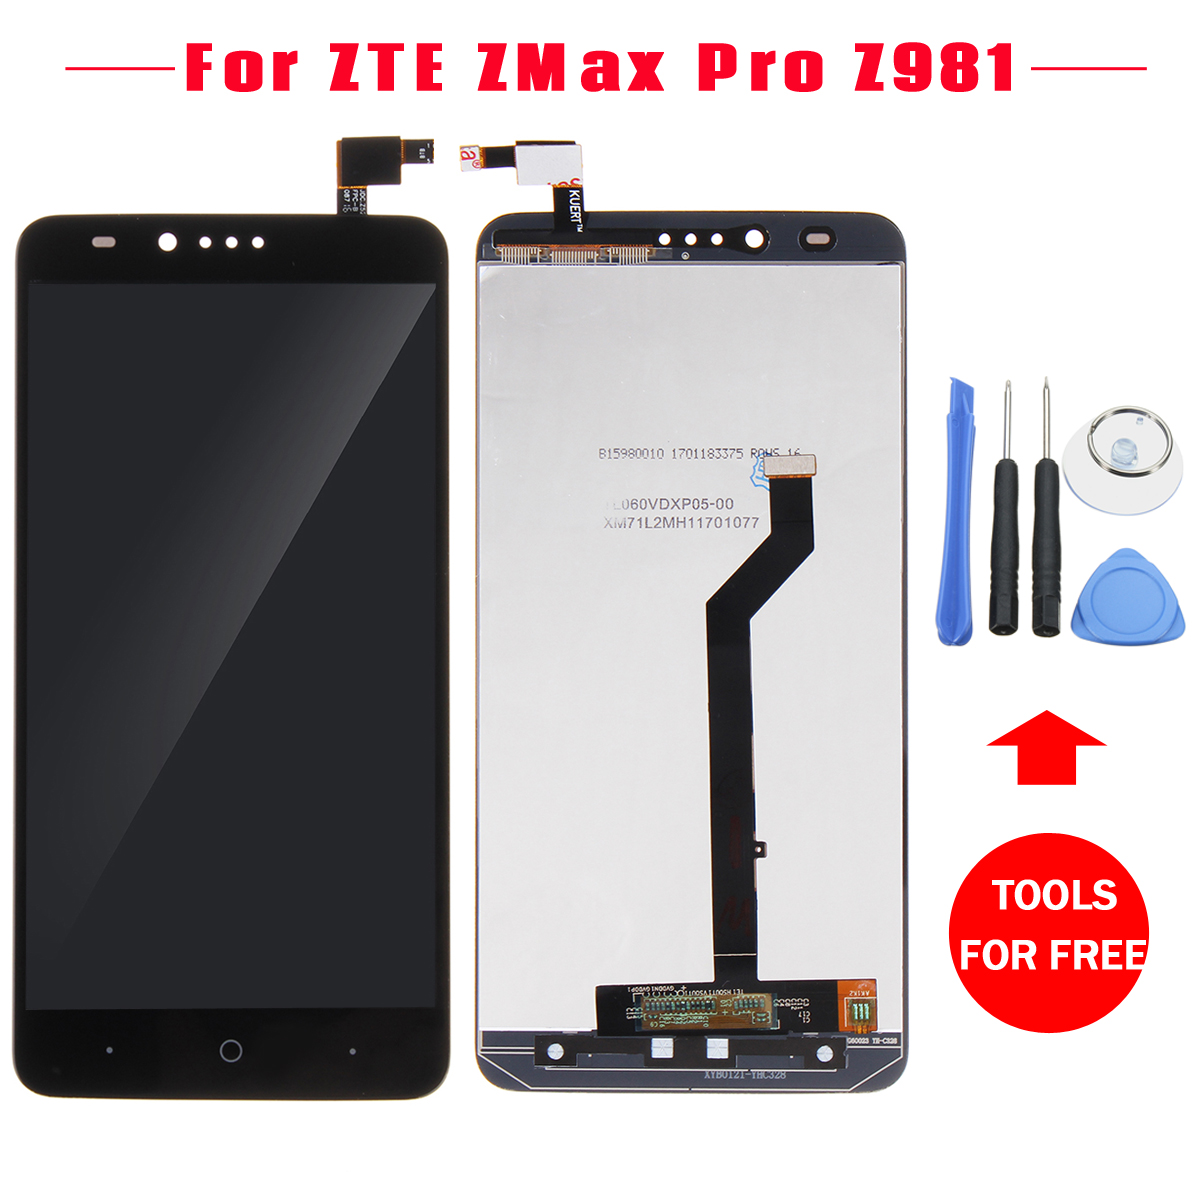 LCD-DisplayTouch-Screen-Digitizer-Assembly-Replacement-With-Tools-For-ZTE-ZMax-Pro-Z981-1249292